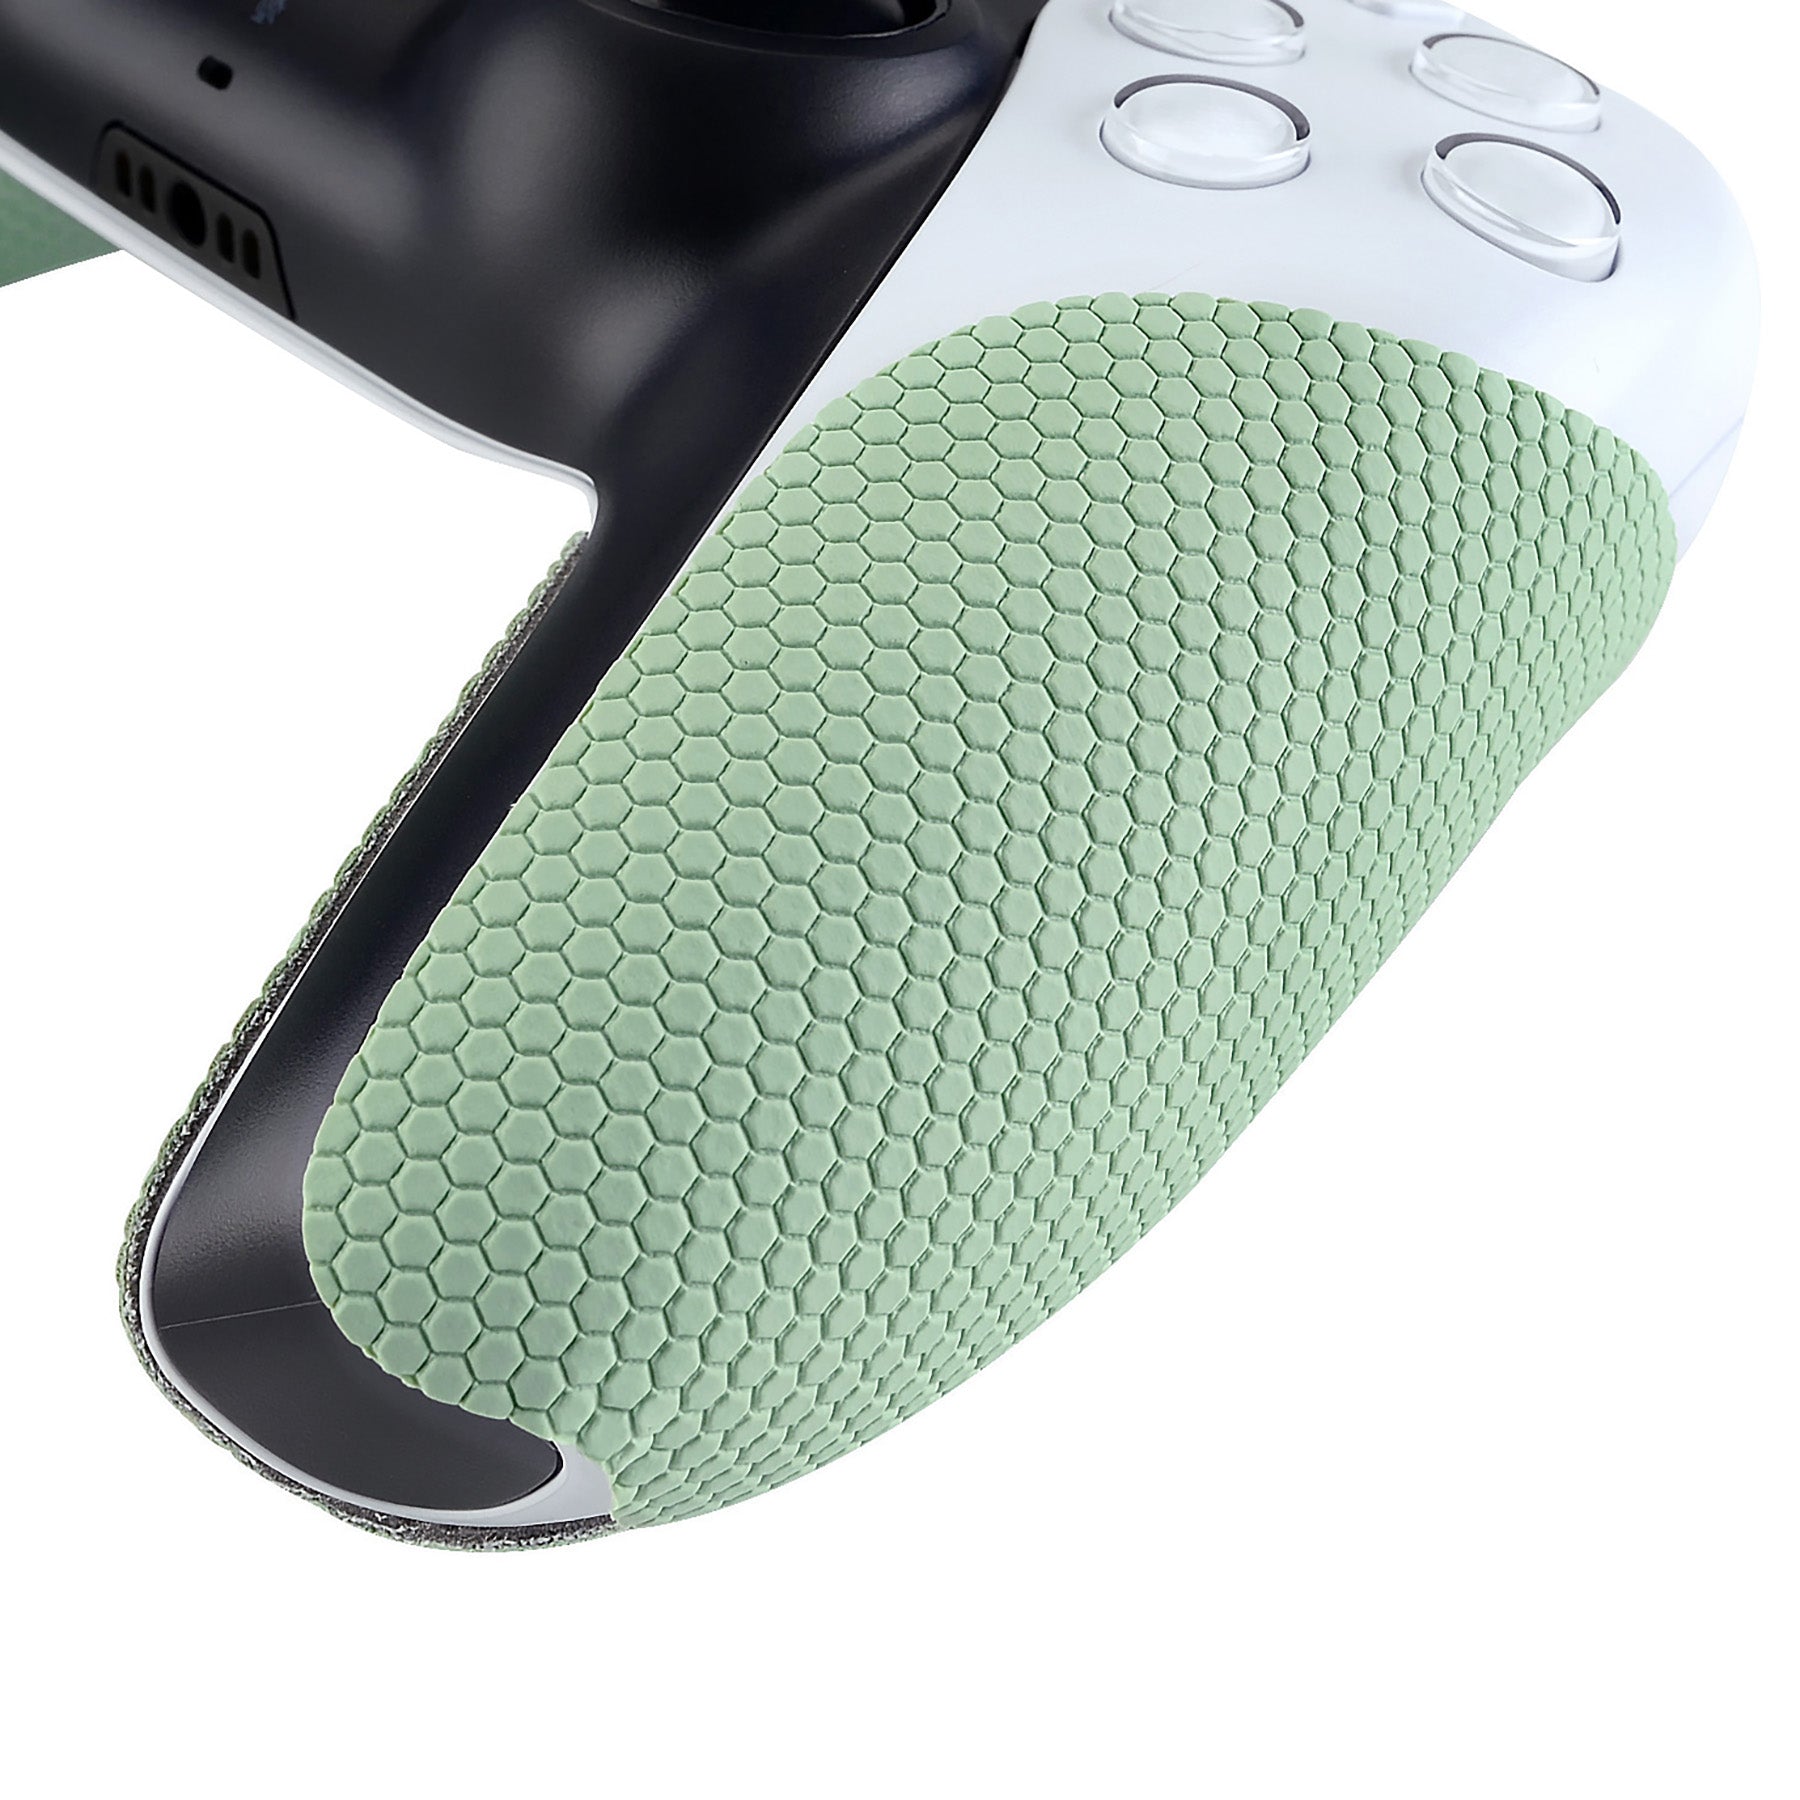 PlayVital Anti-Skid Sweat-Absorbent Controller Grip for PS5